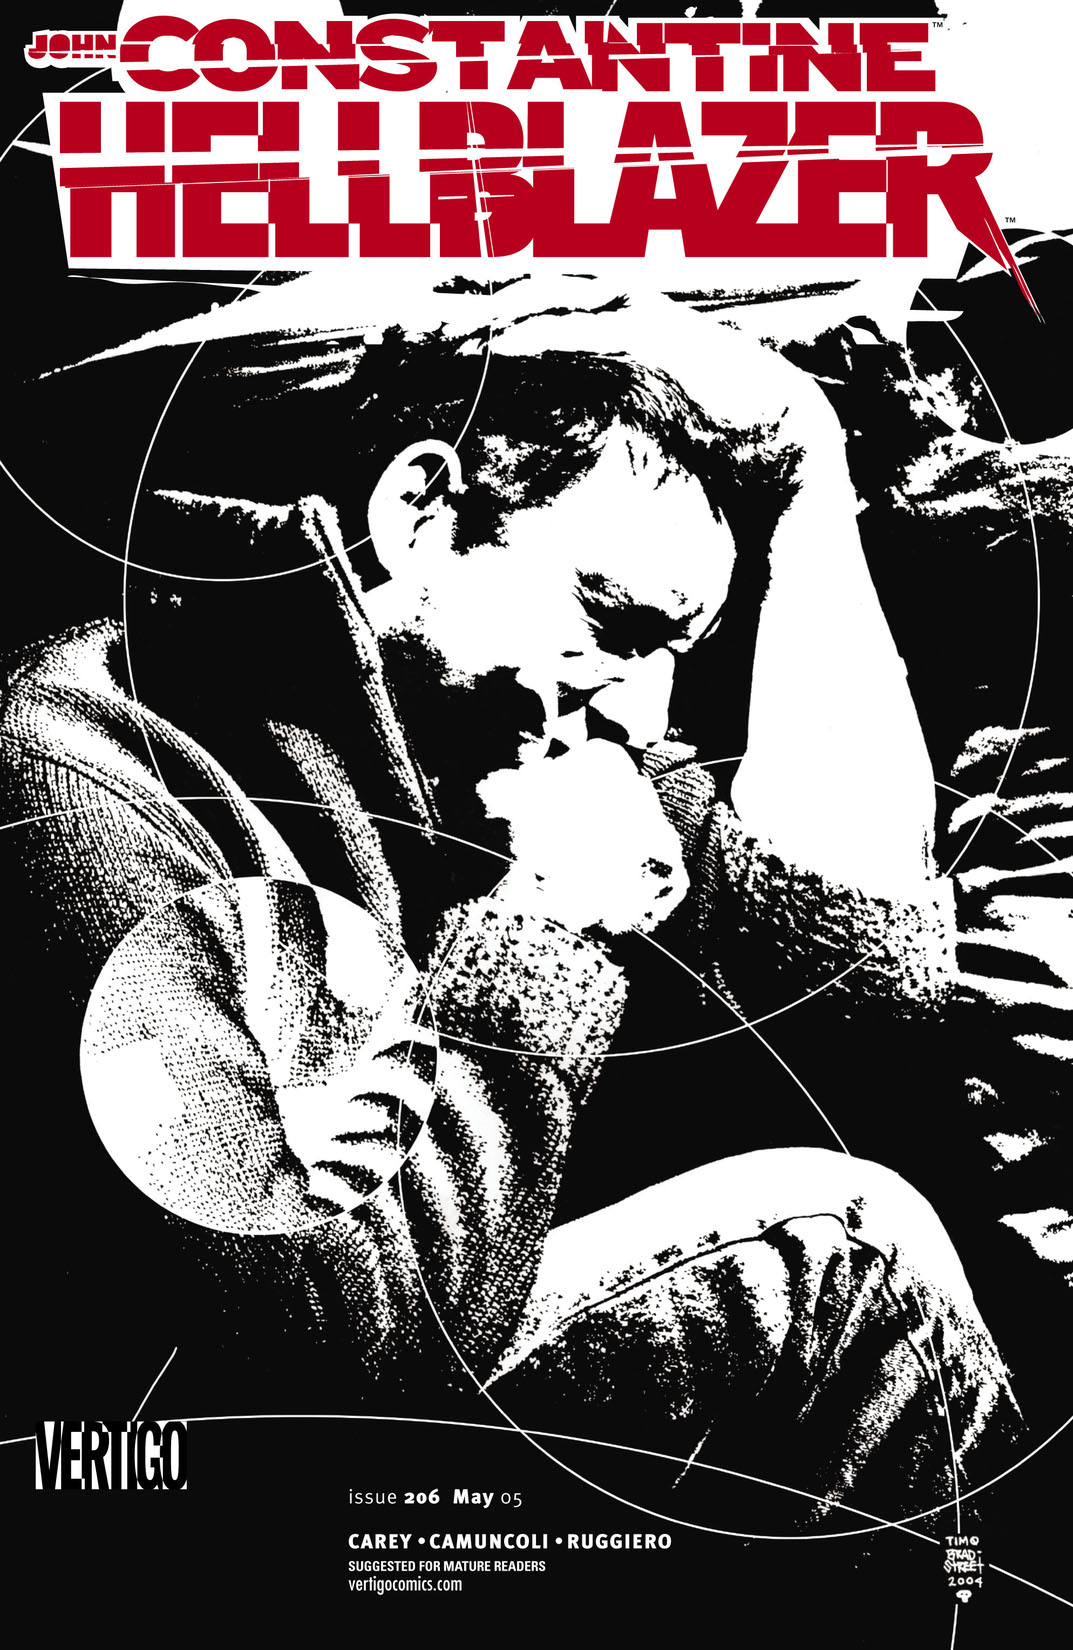 Hellblazer #206 preview images